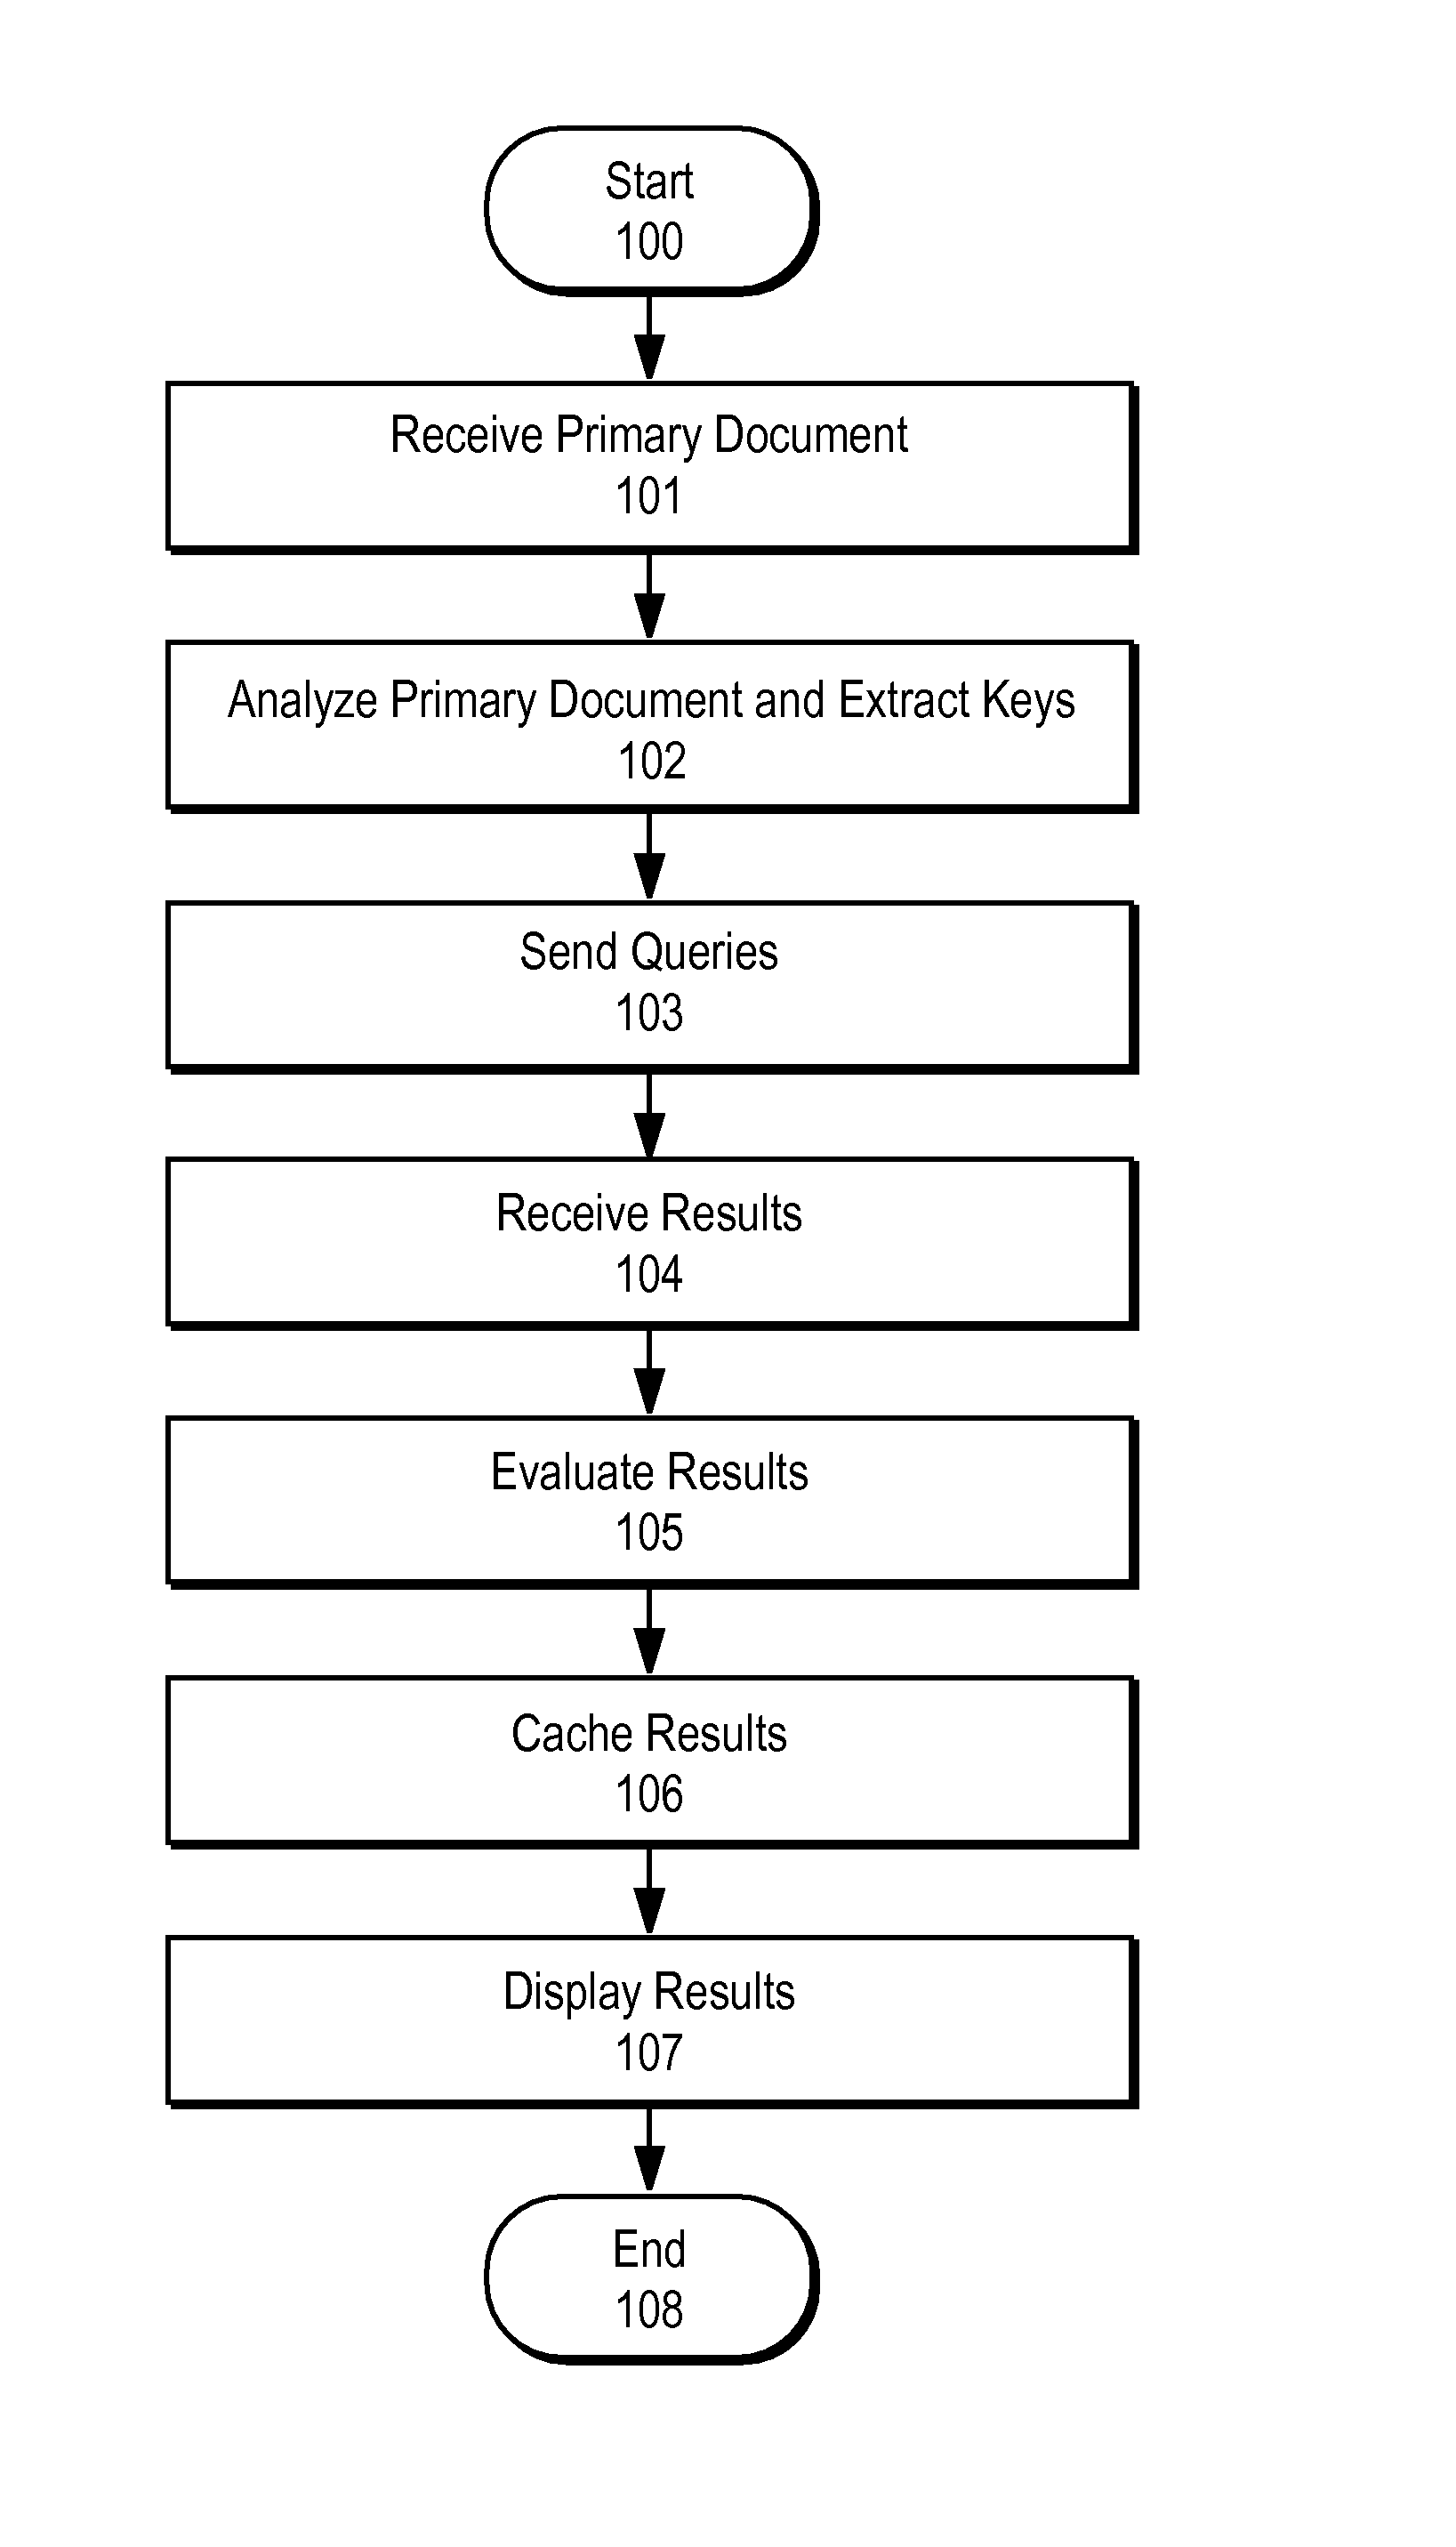 Asynchronous unconscious retrieval in a network of information appliances